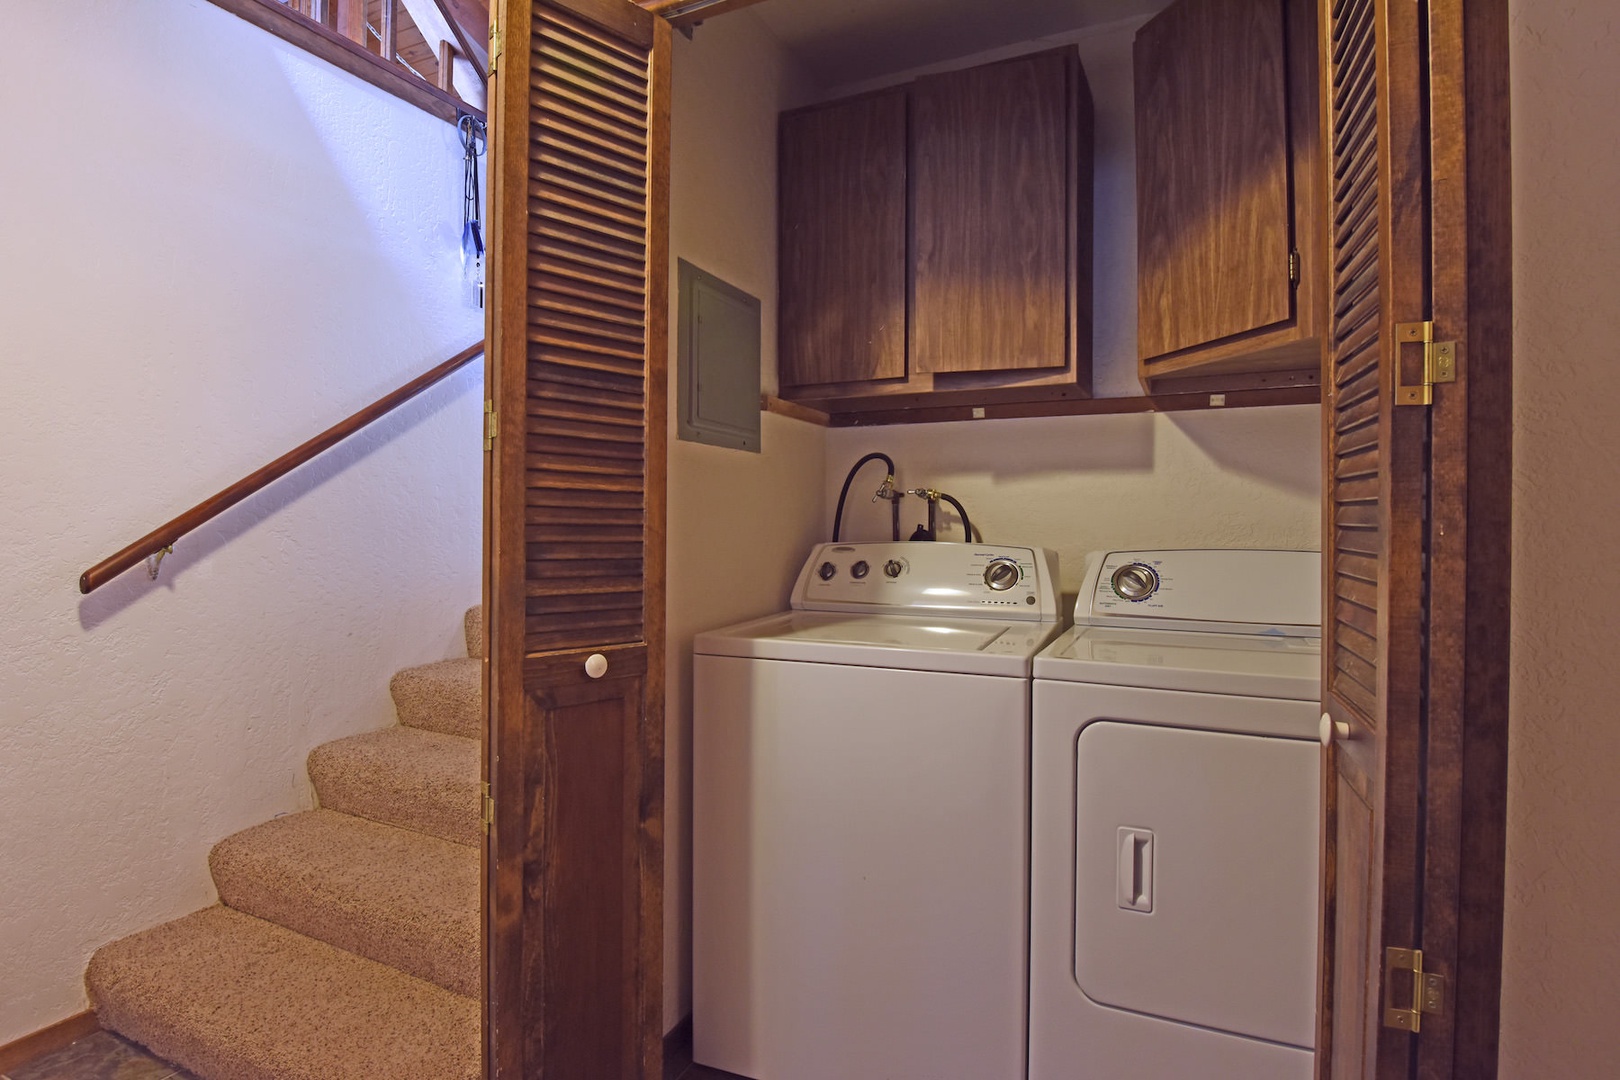 Private washer and dryer for your use